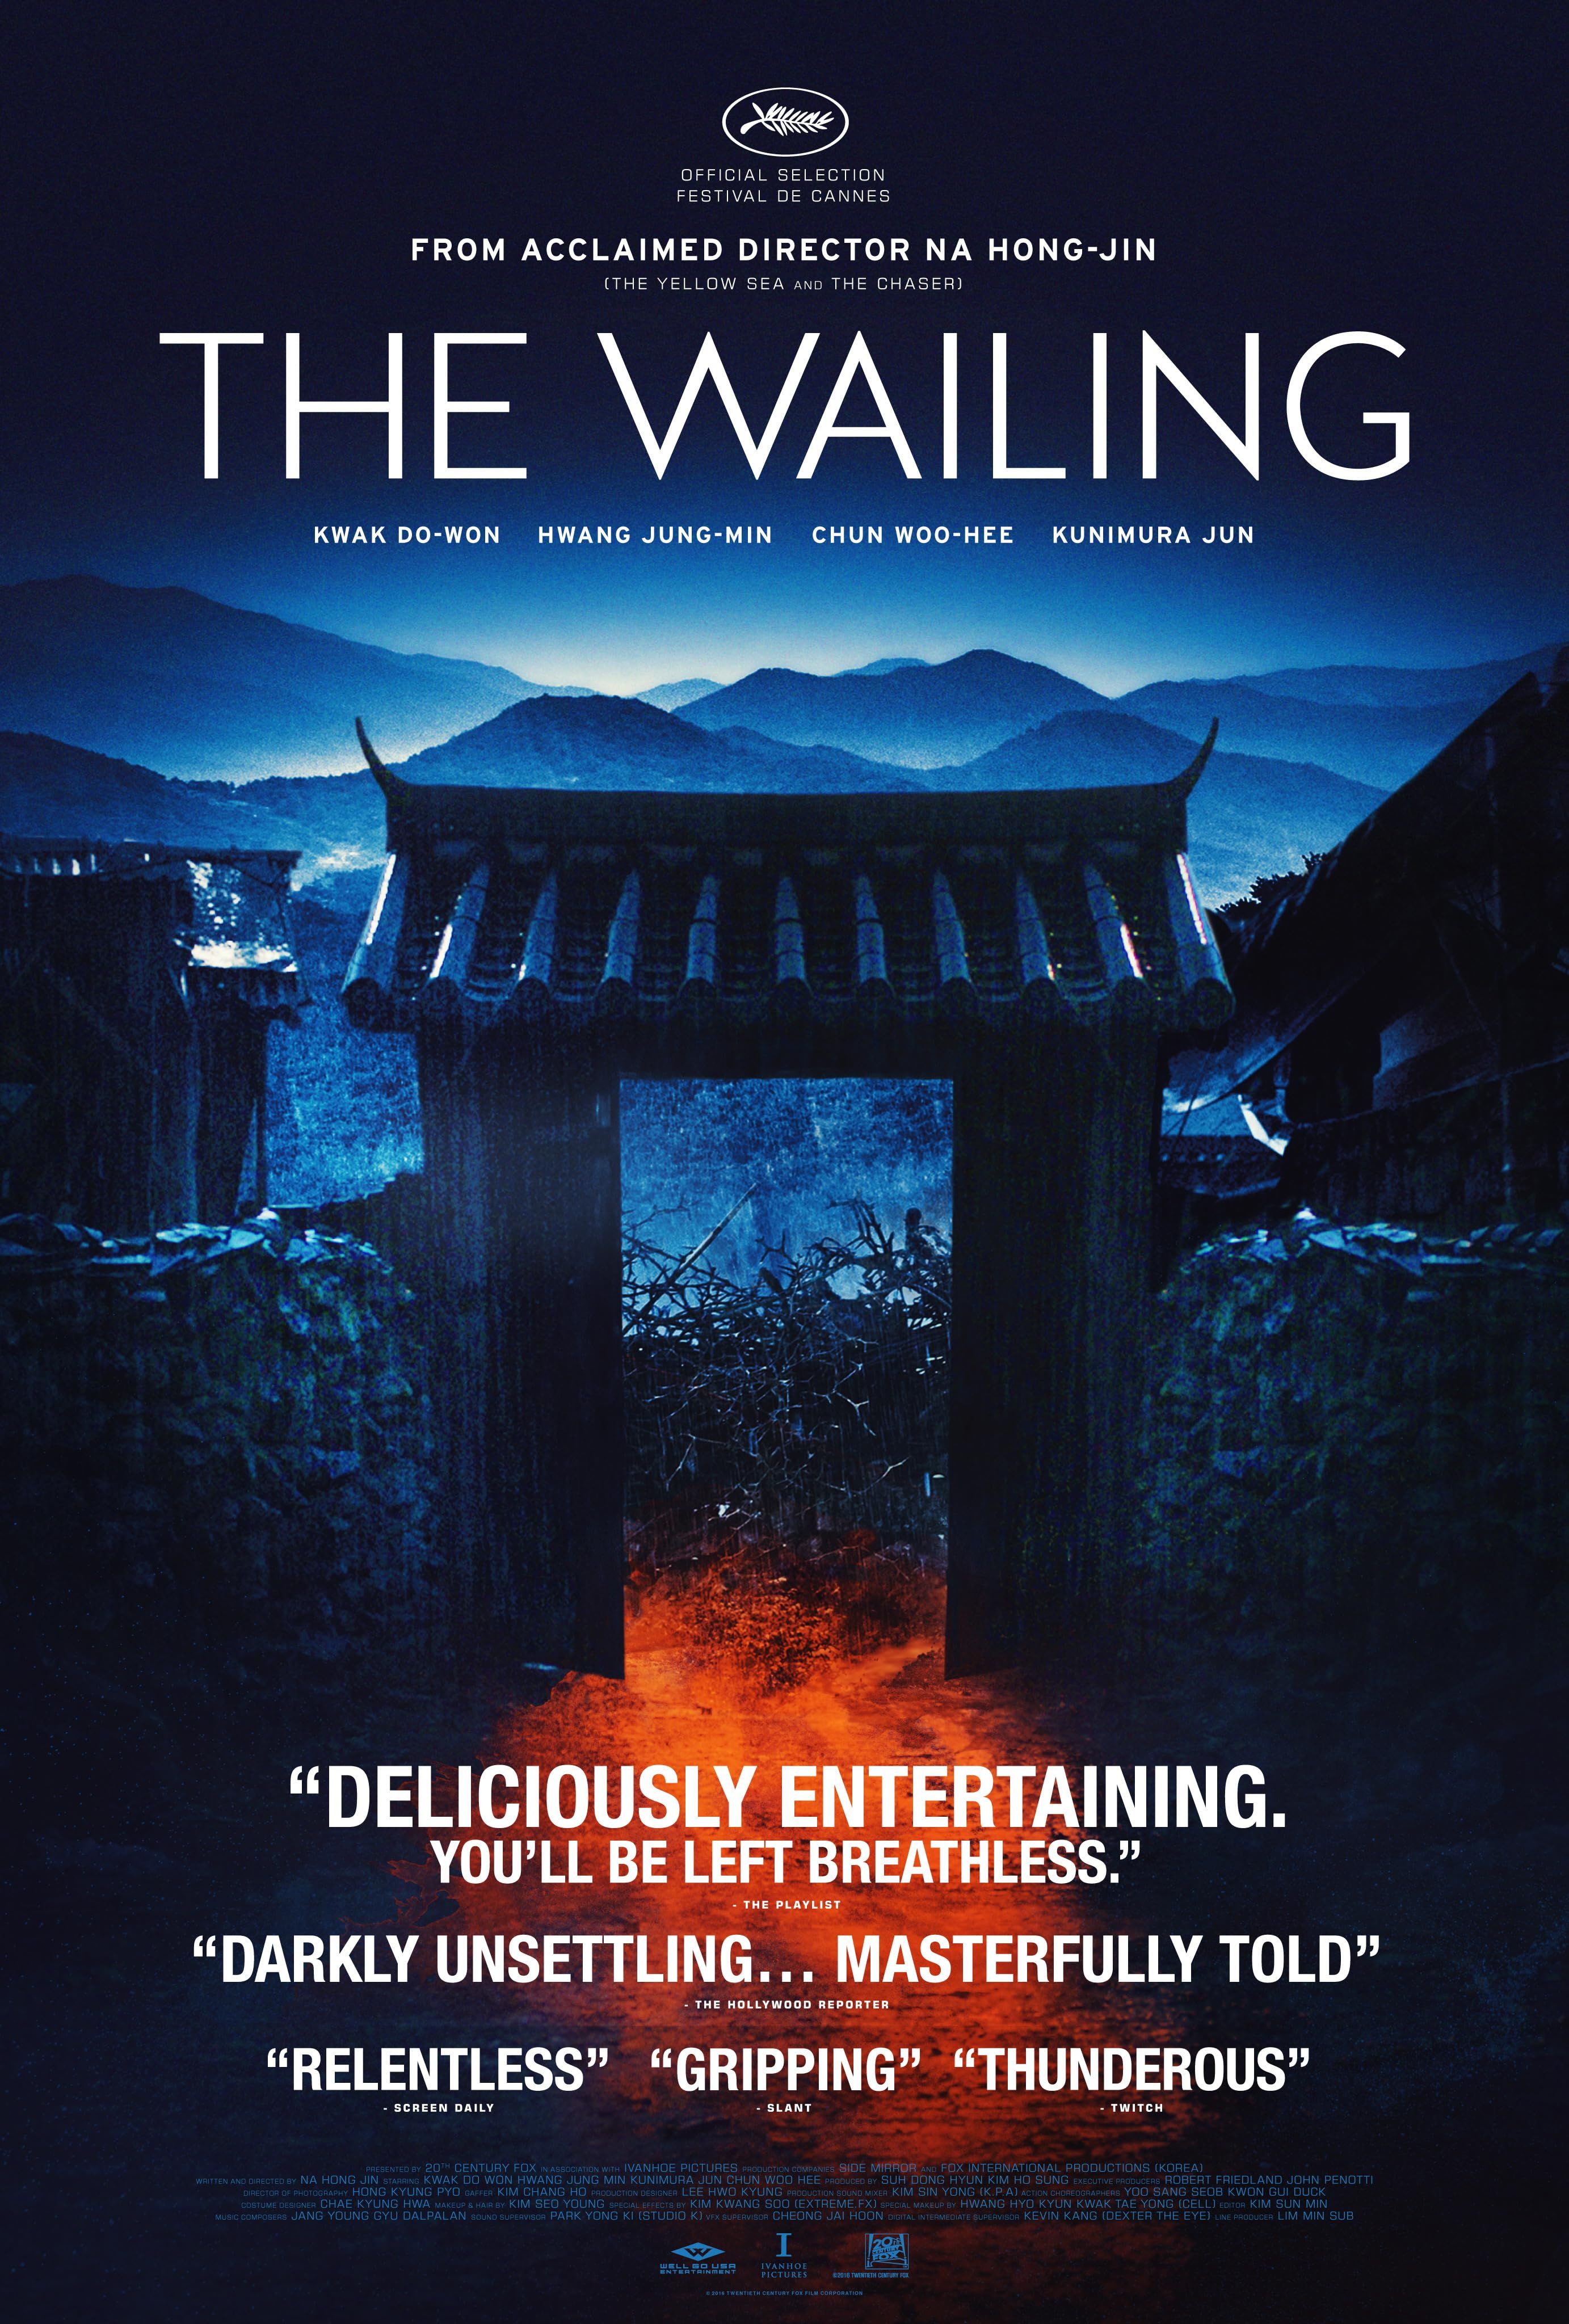 The Wailing (2016) Hindi Dubbed Movie download full movie